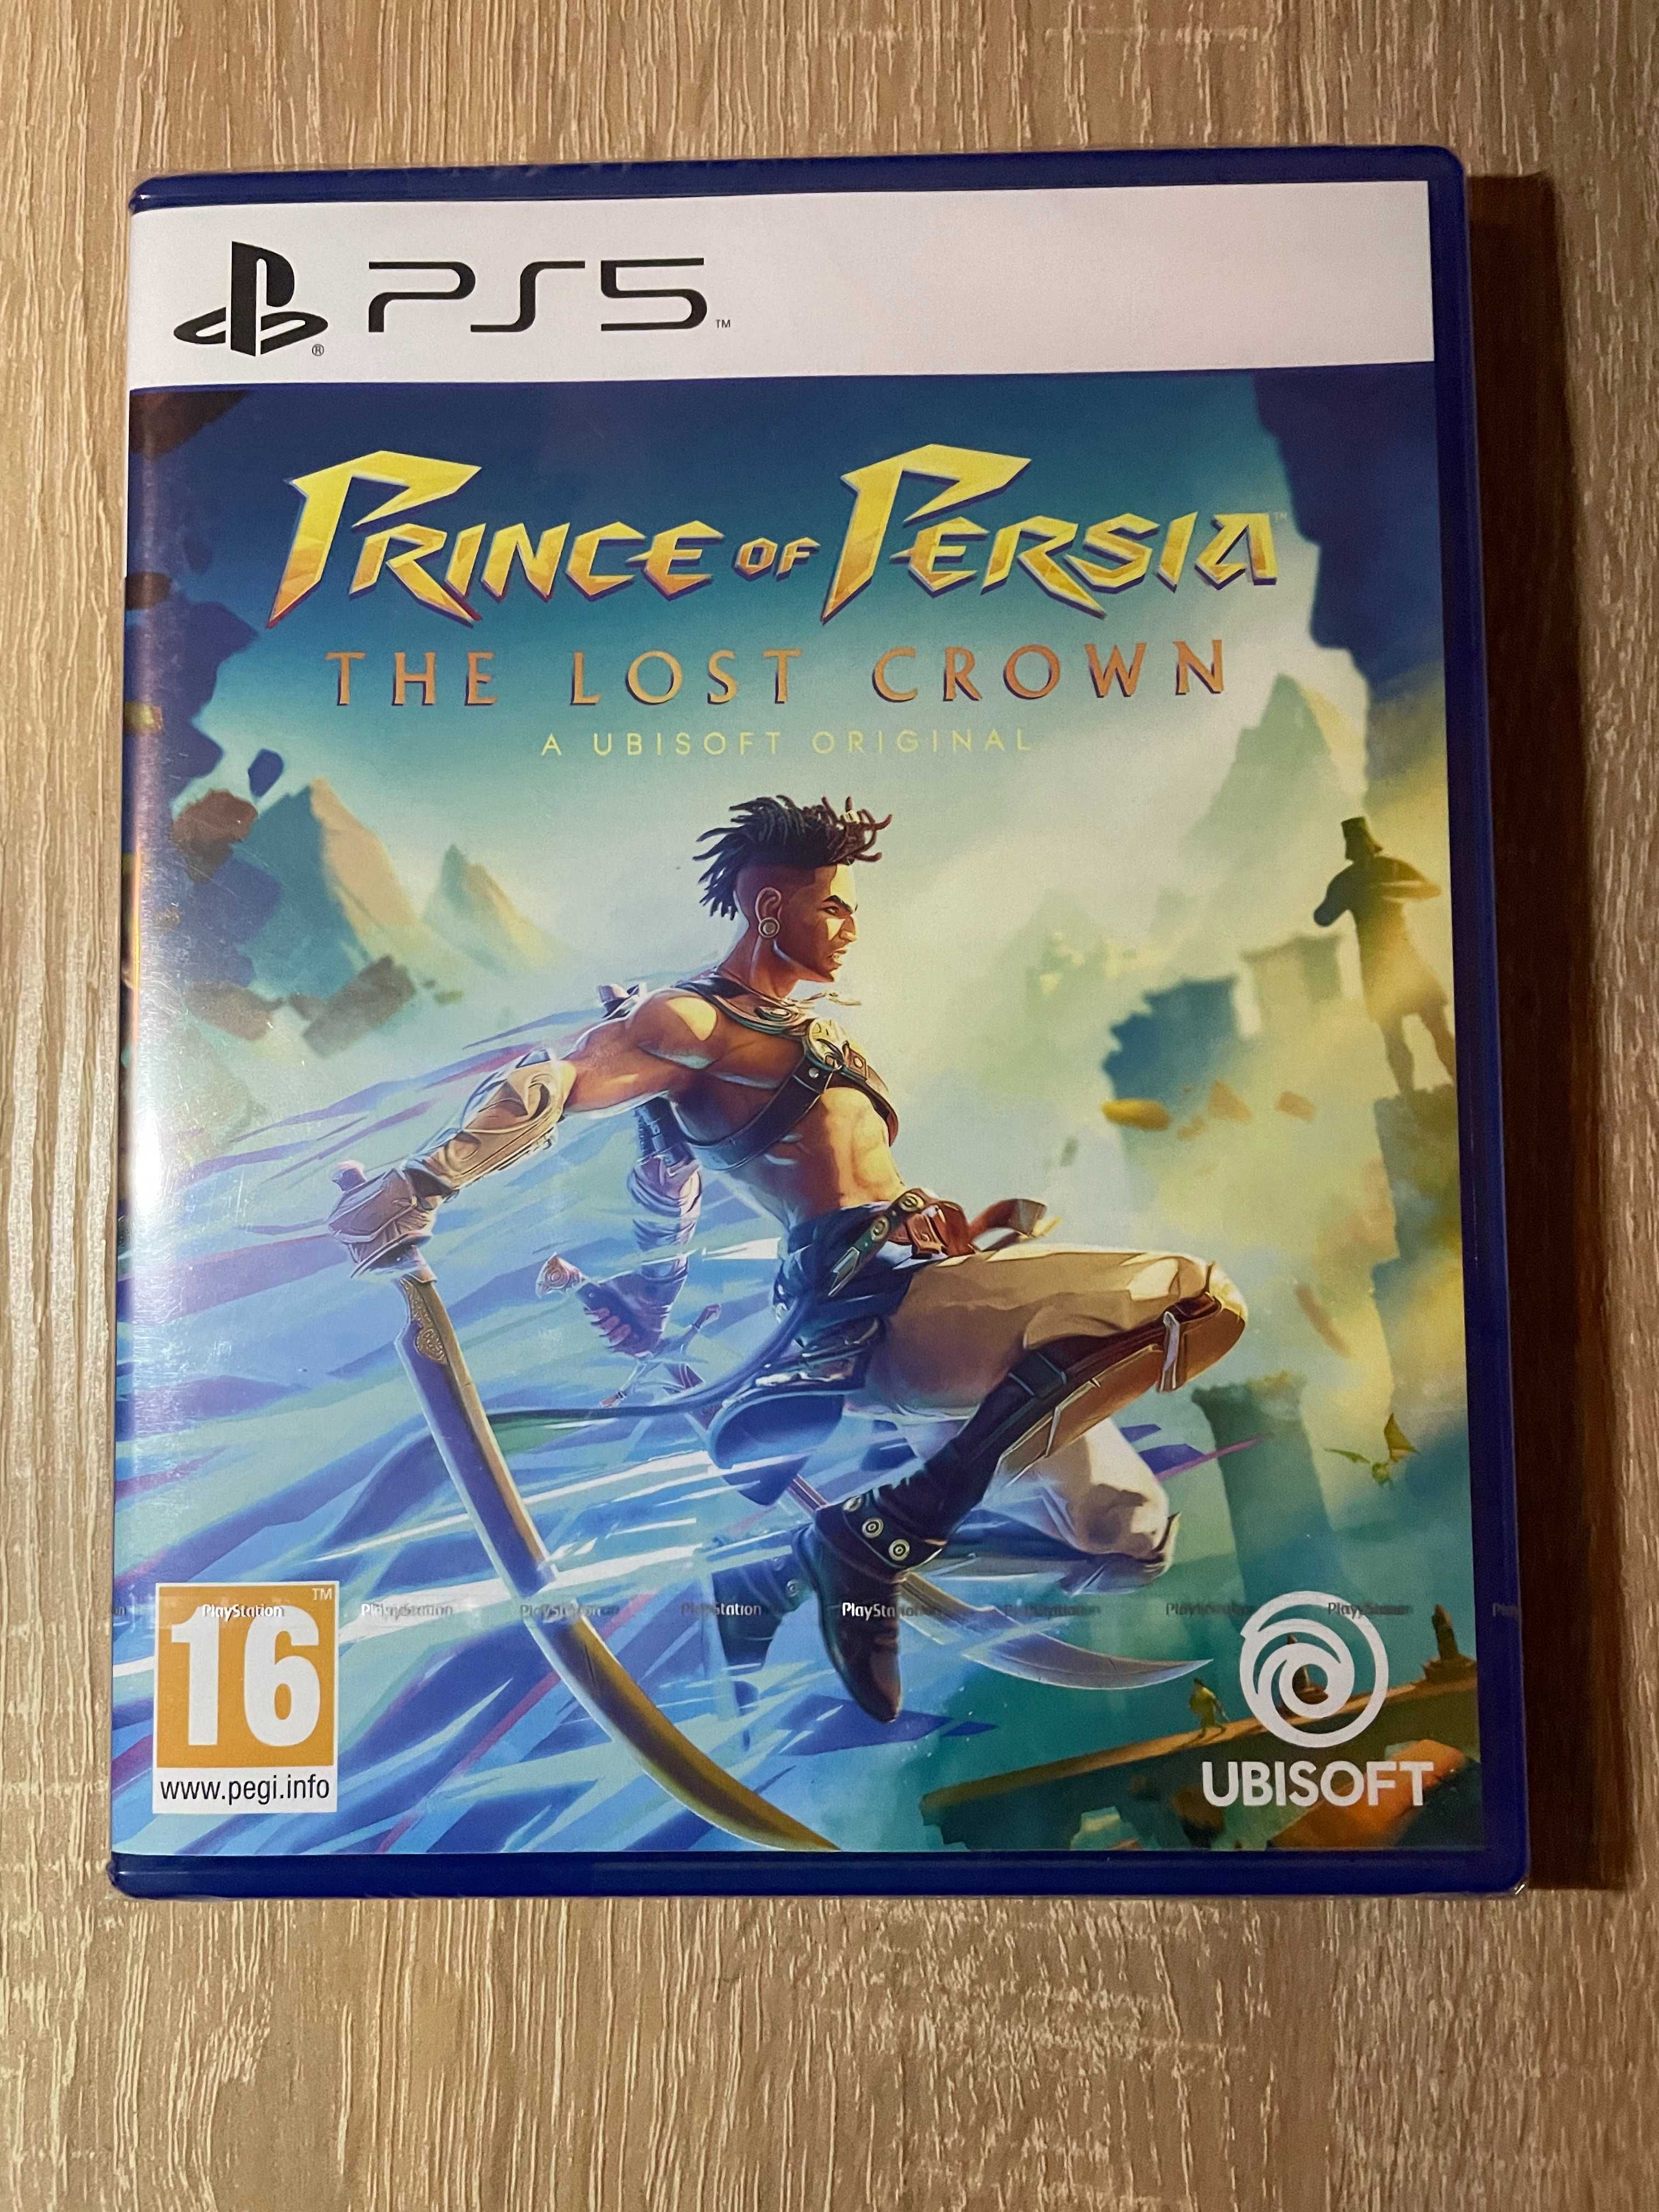 Гра Prince of Persia: The Lost Crown для PS5 (Blu-ray диск)